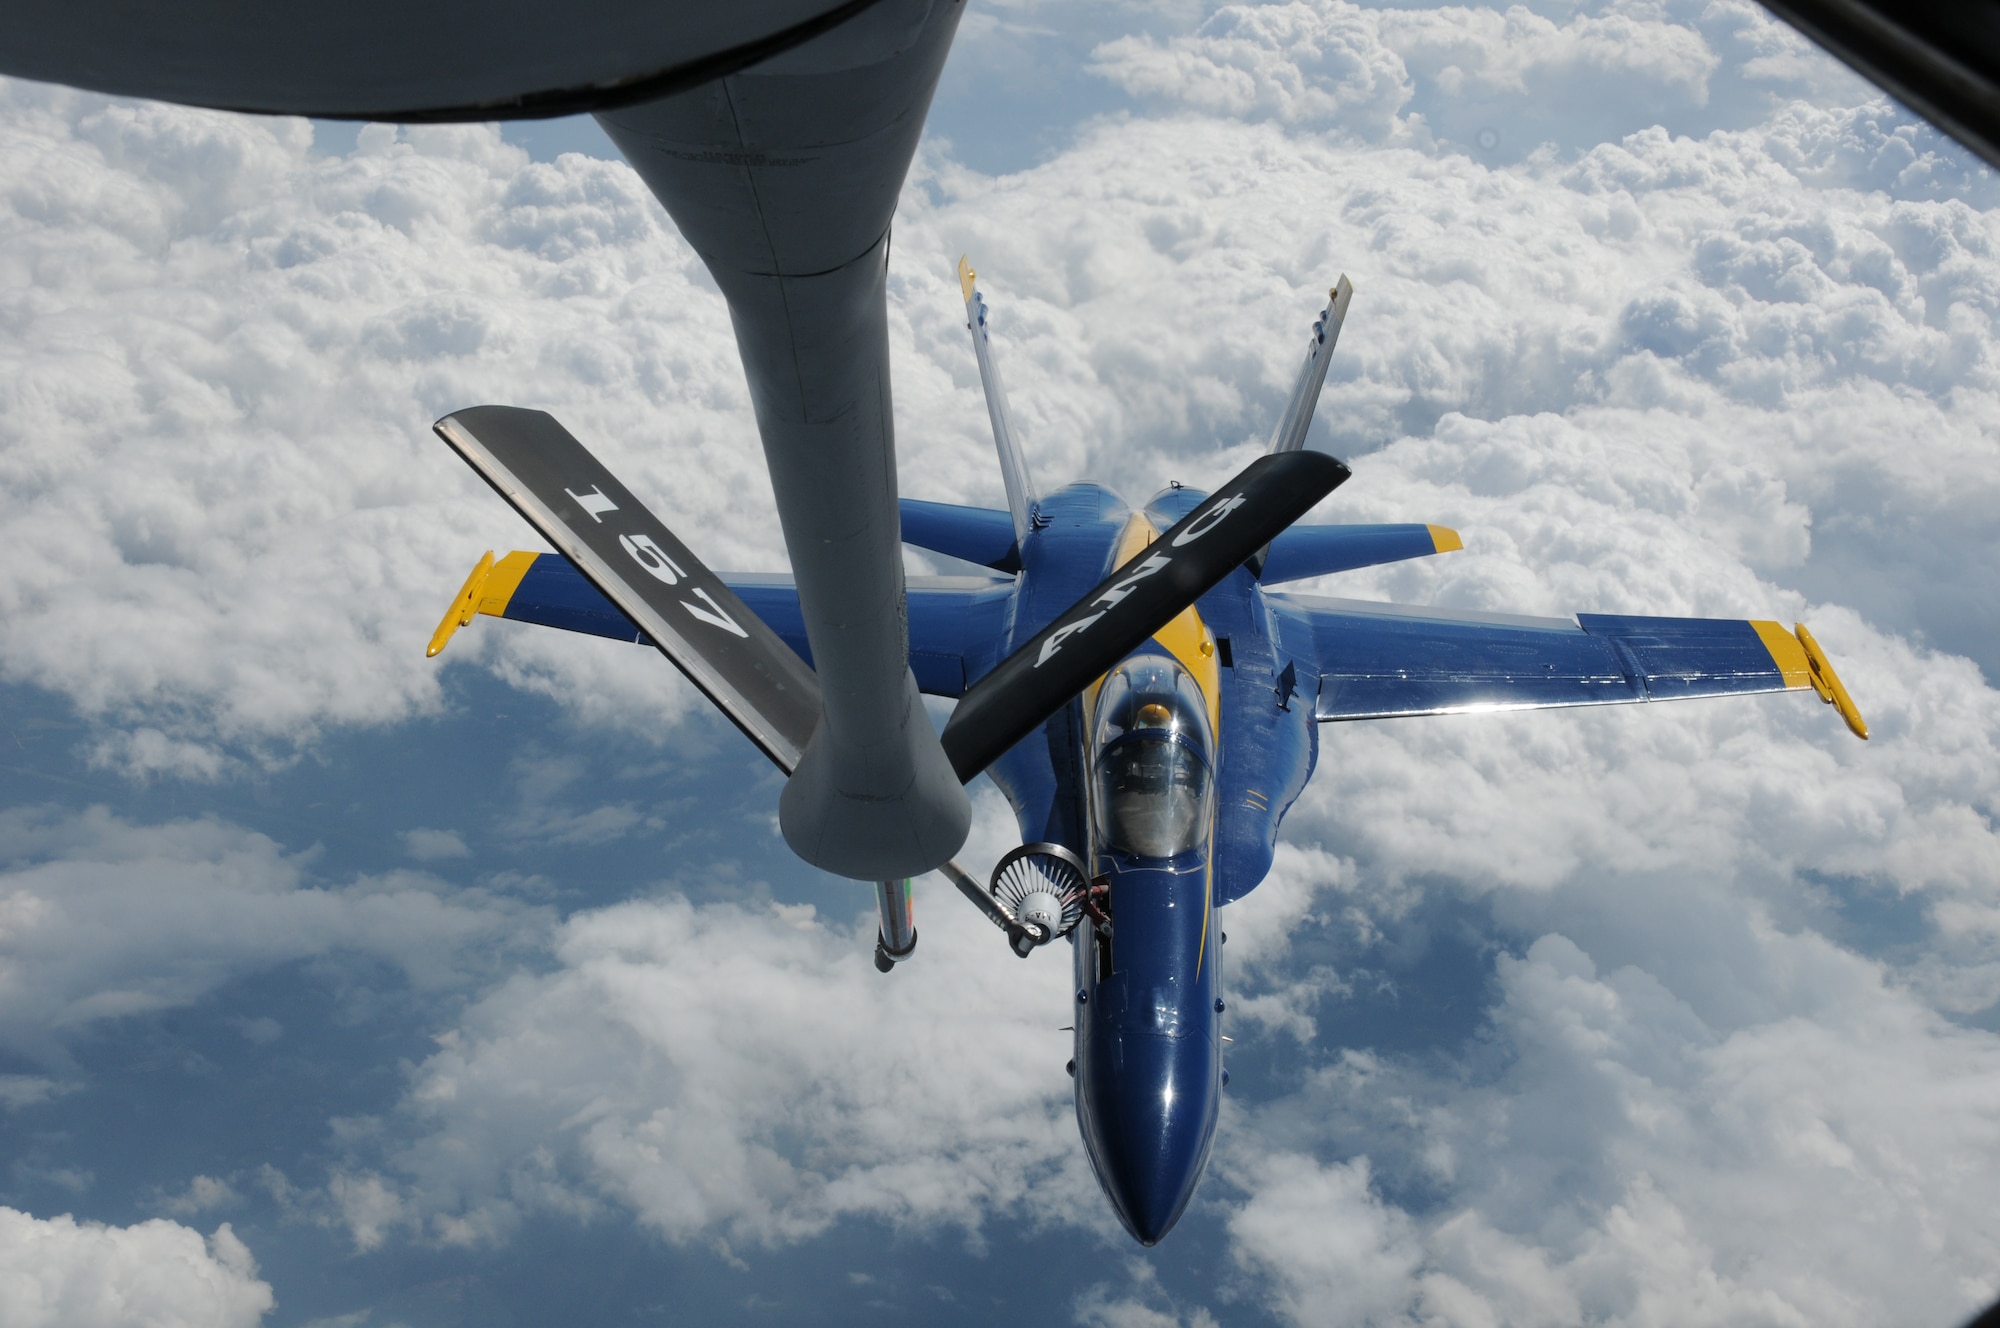 An F/A-18 Hornet belonging to the United States Navy's Flight Demonstration Squadron, the Blue Angels, receives fuel from a KC-135R Stratotanker over the Eastern United States on August 25, 2010.The tanker aircraft and crew are from the 157th Air Refueling Wing at Pease Air National Guard Guard Base, New Hampshire. The Blue Angels are headed to the 2010 Boston New-England Airshow  at Pease International Airport on August 28th-29th 2010. Although the NH Air National Guard won't be hosting the airshow, they will be providing logistical support to the Blue Angels and other military aircraft. (U.S. Air Force photo/Staff Sgt. Curtis J. Lenz)

